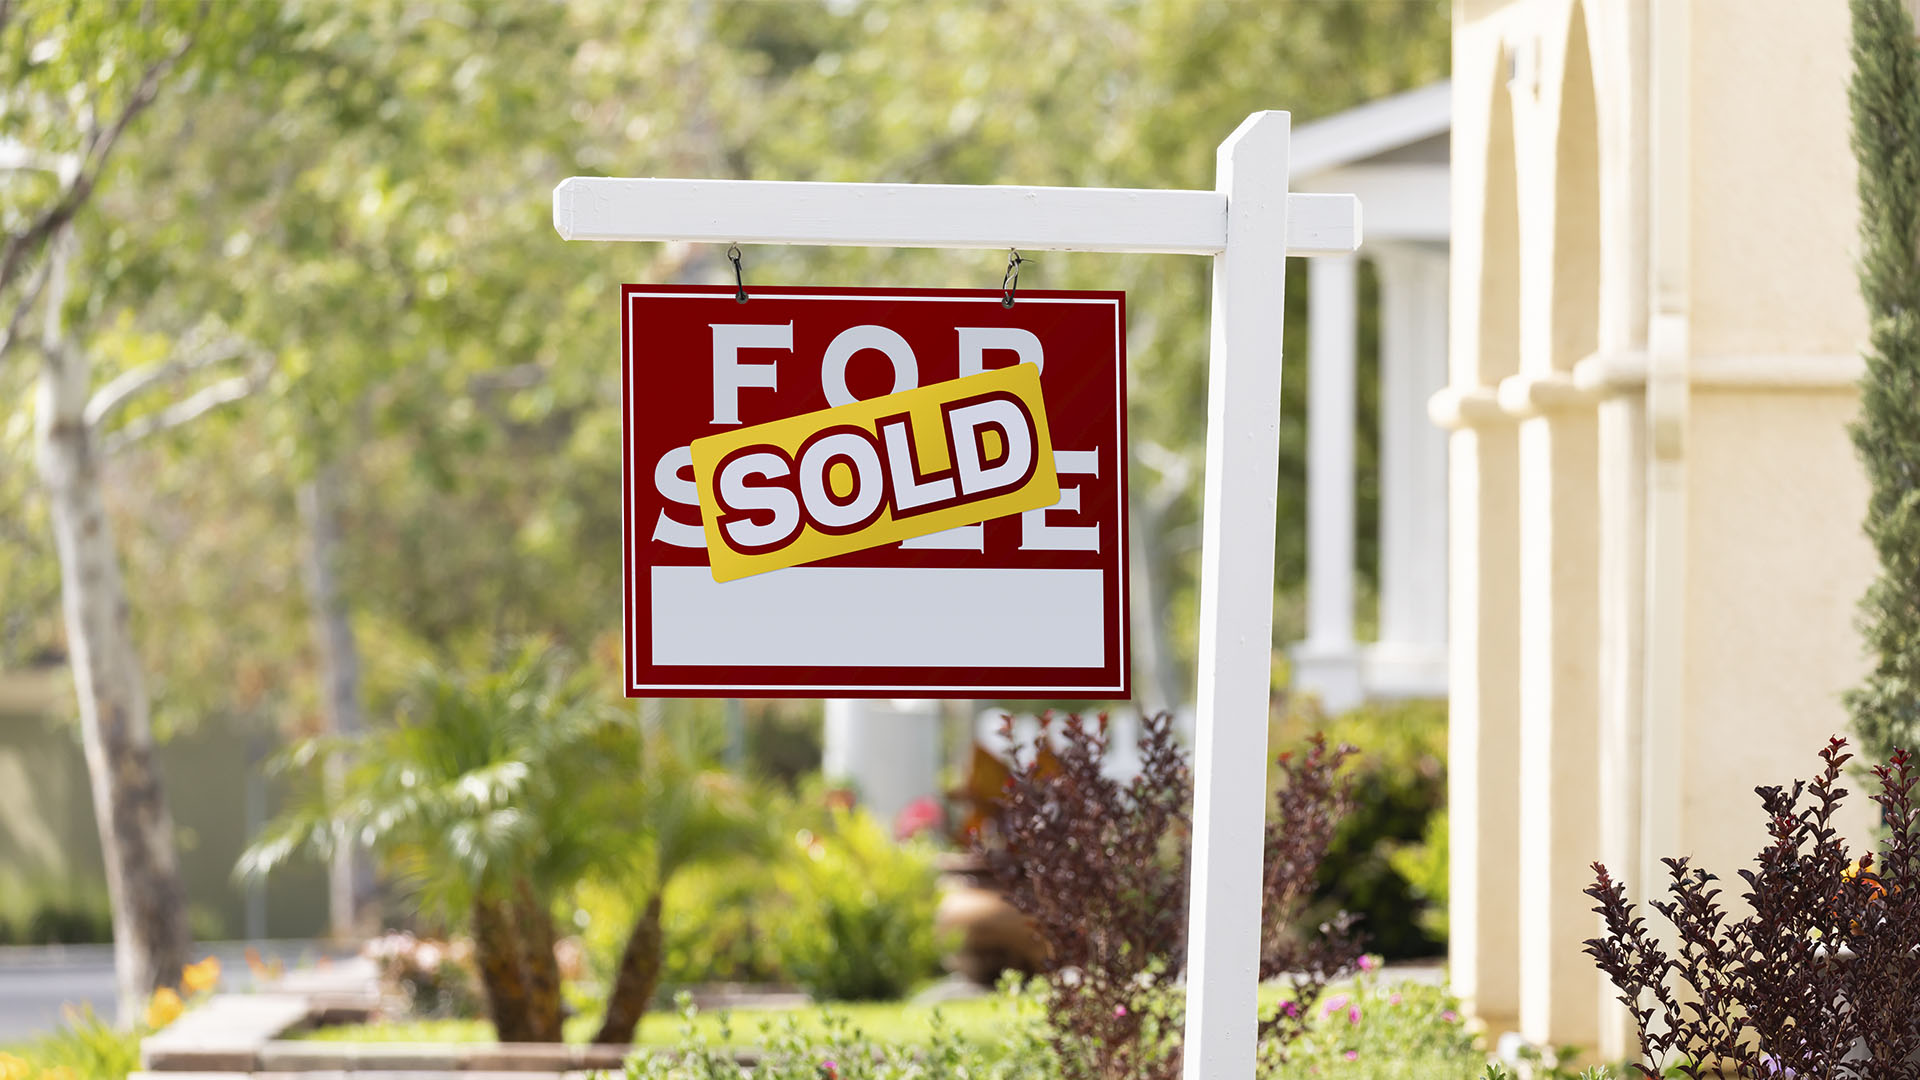 A "For Sale" sign with a "Sold" sticker is displayed in front of a house, indicating that it has been sold. Trees and foliage are in the background. Is renting ruining your future? This scene might just inspire you to take that next big step.